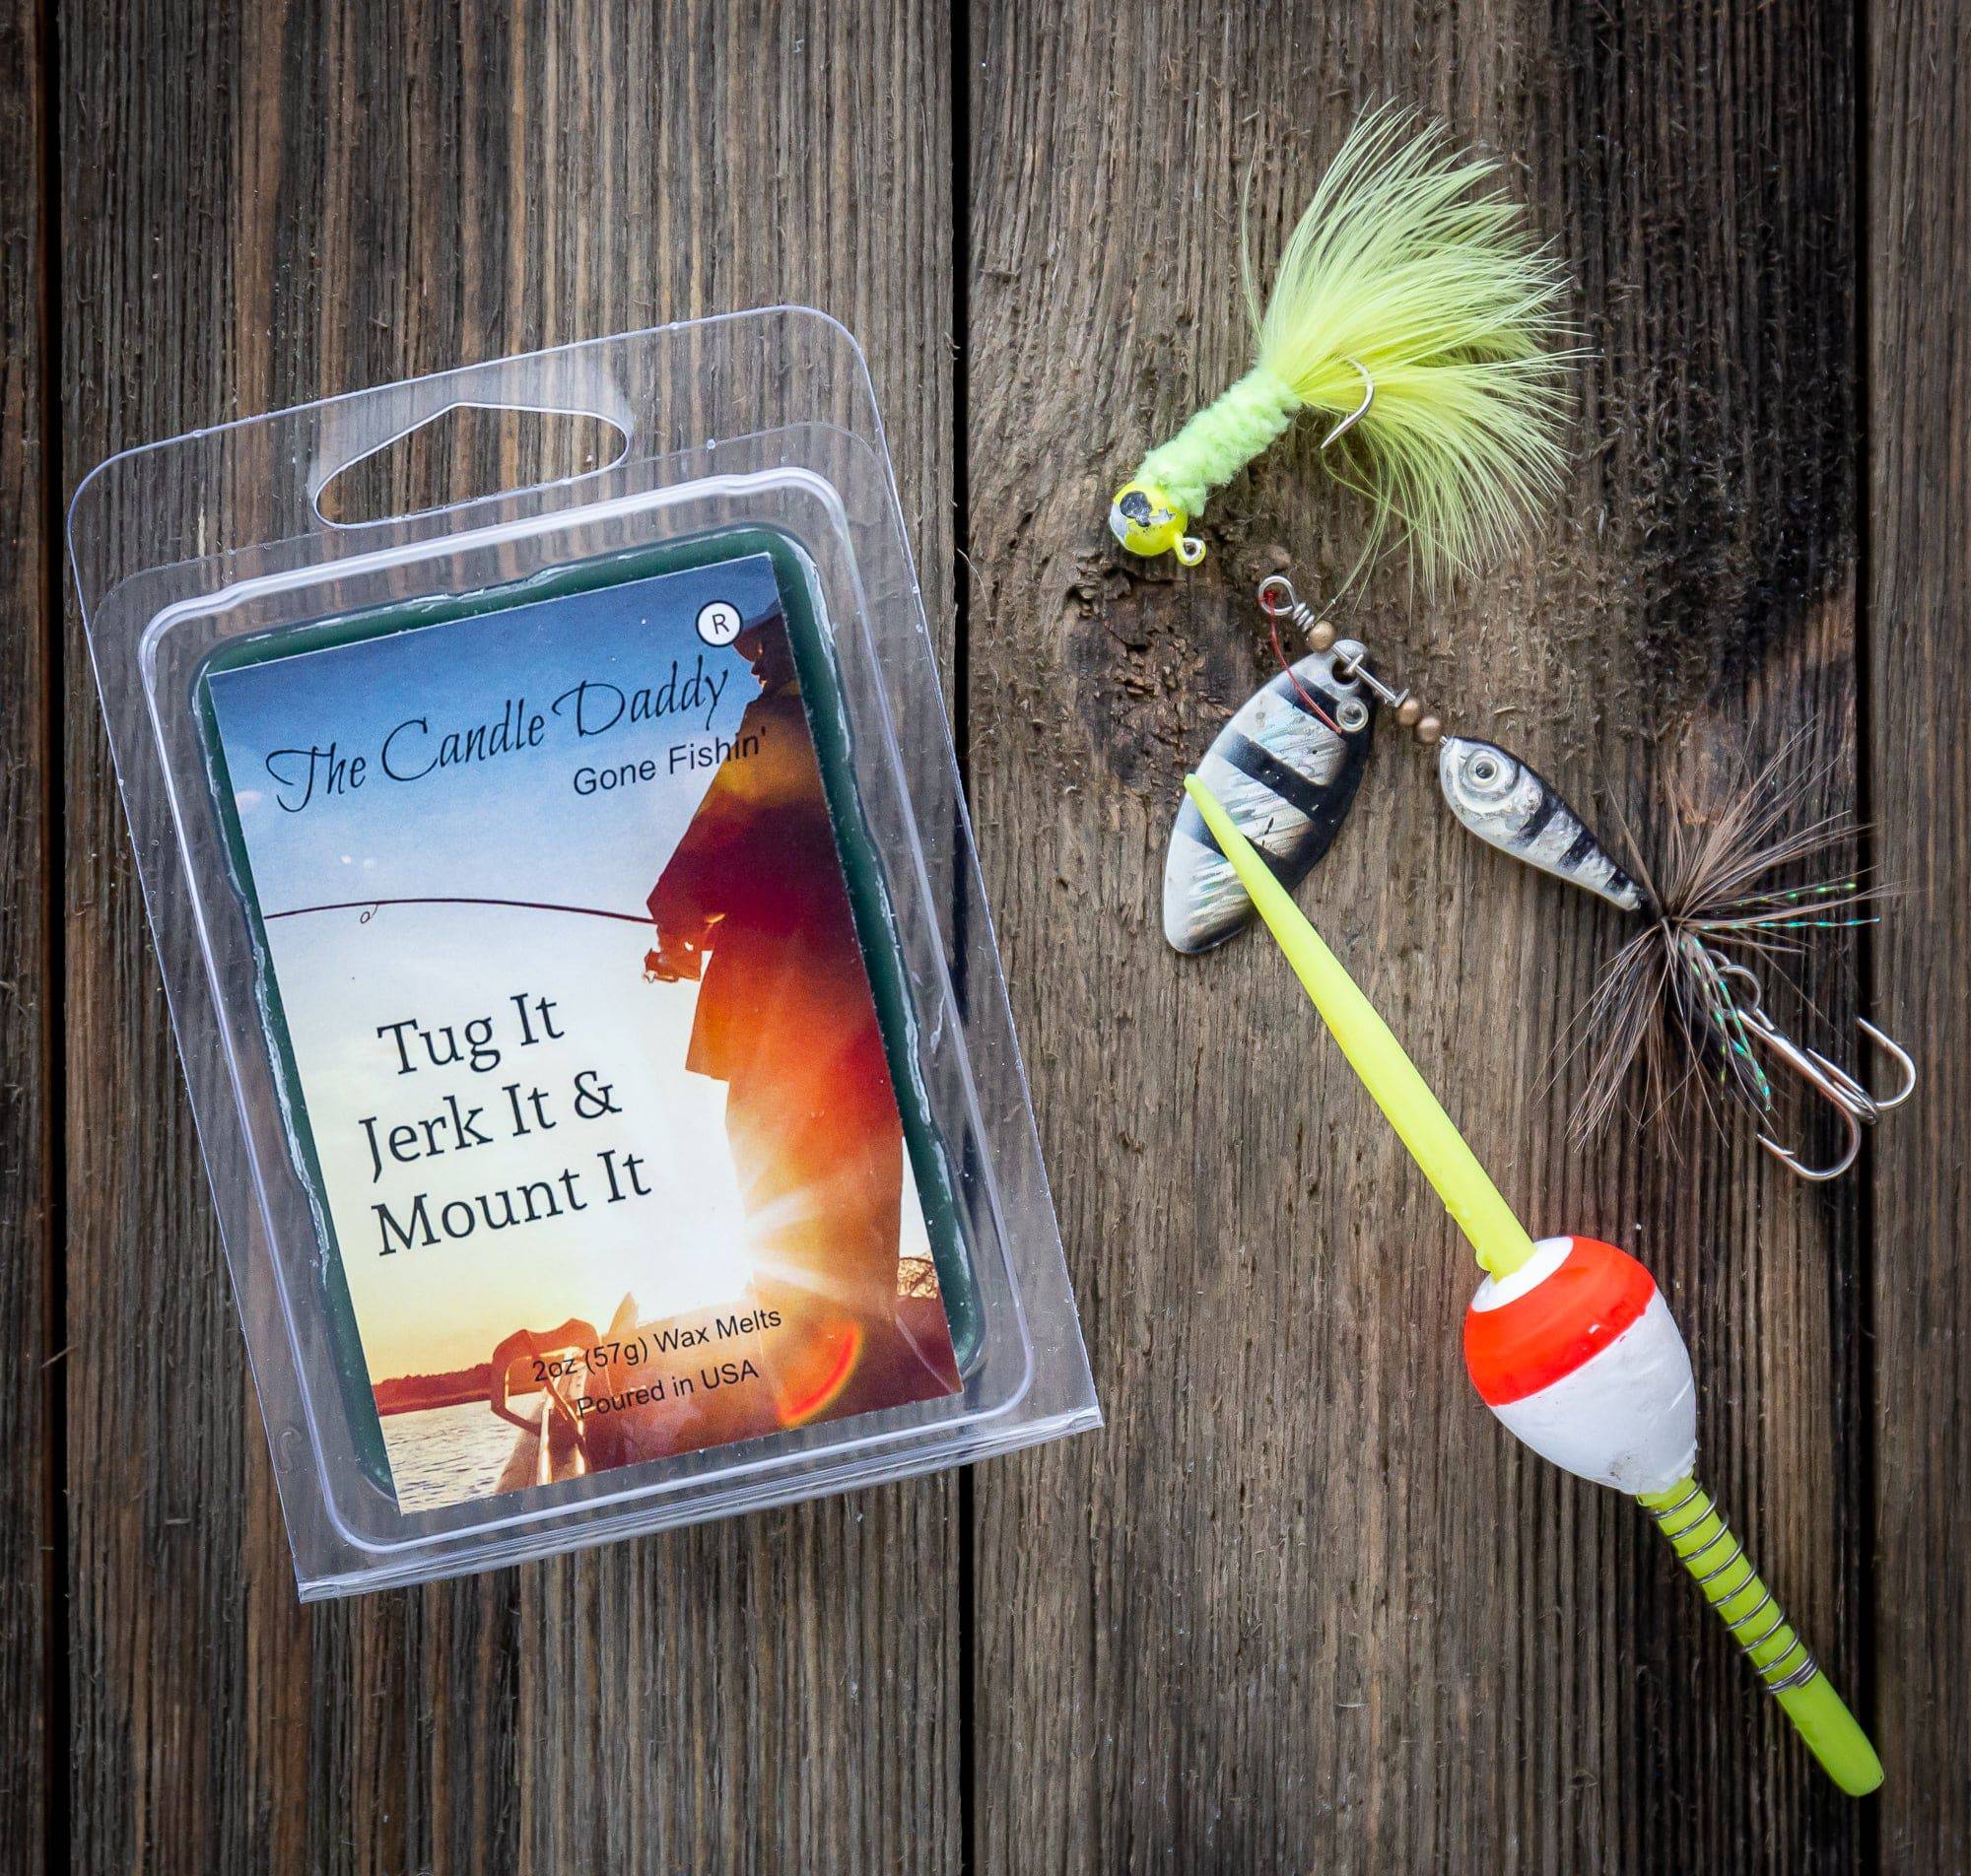 5 Pack - The Candle Daddy's Gone Fishin' - Tug It Jerk It & Mount